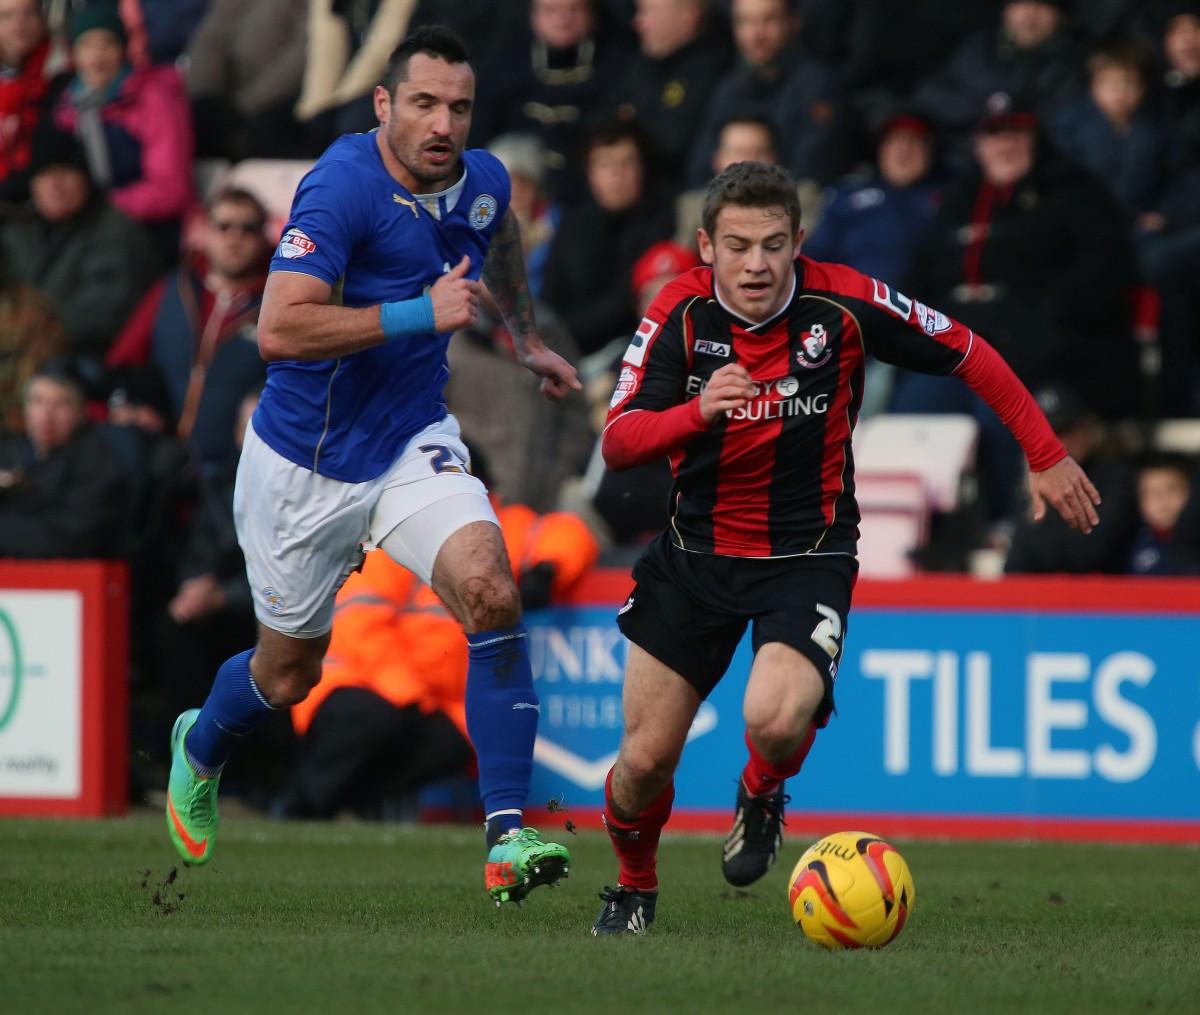 AFC Bournemouth v Leicester City at the Goldsands Stadium on Saturday, February 1, 2014.